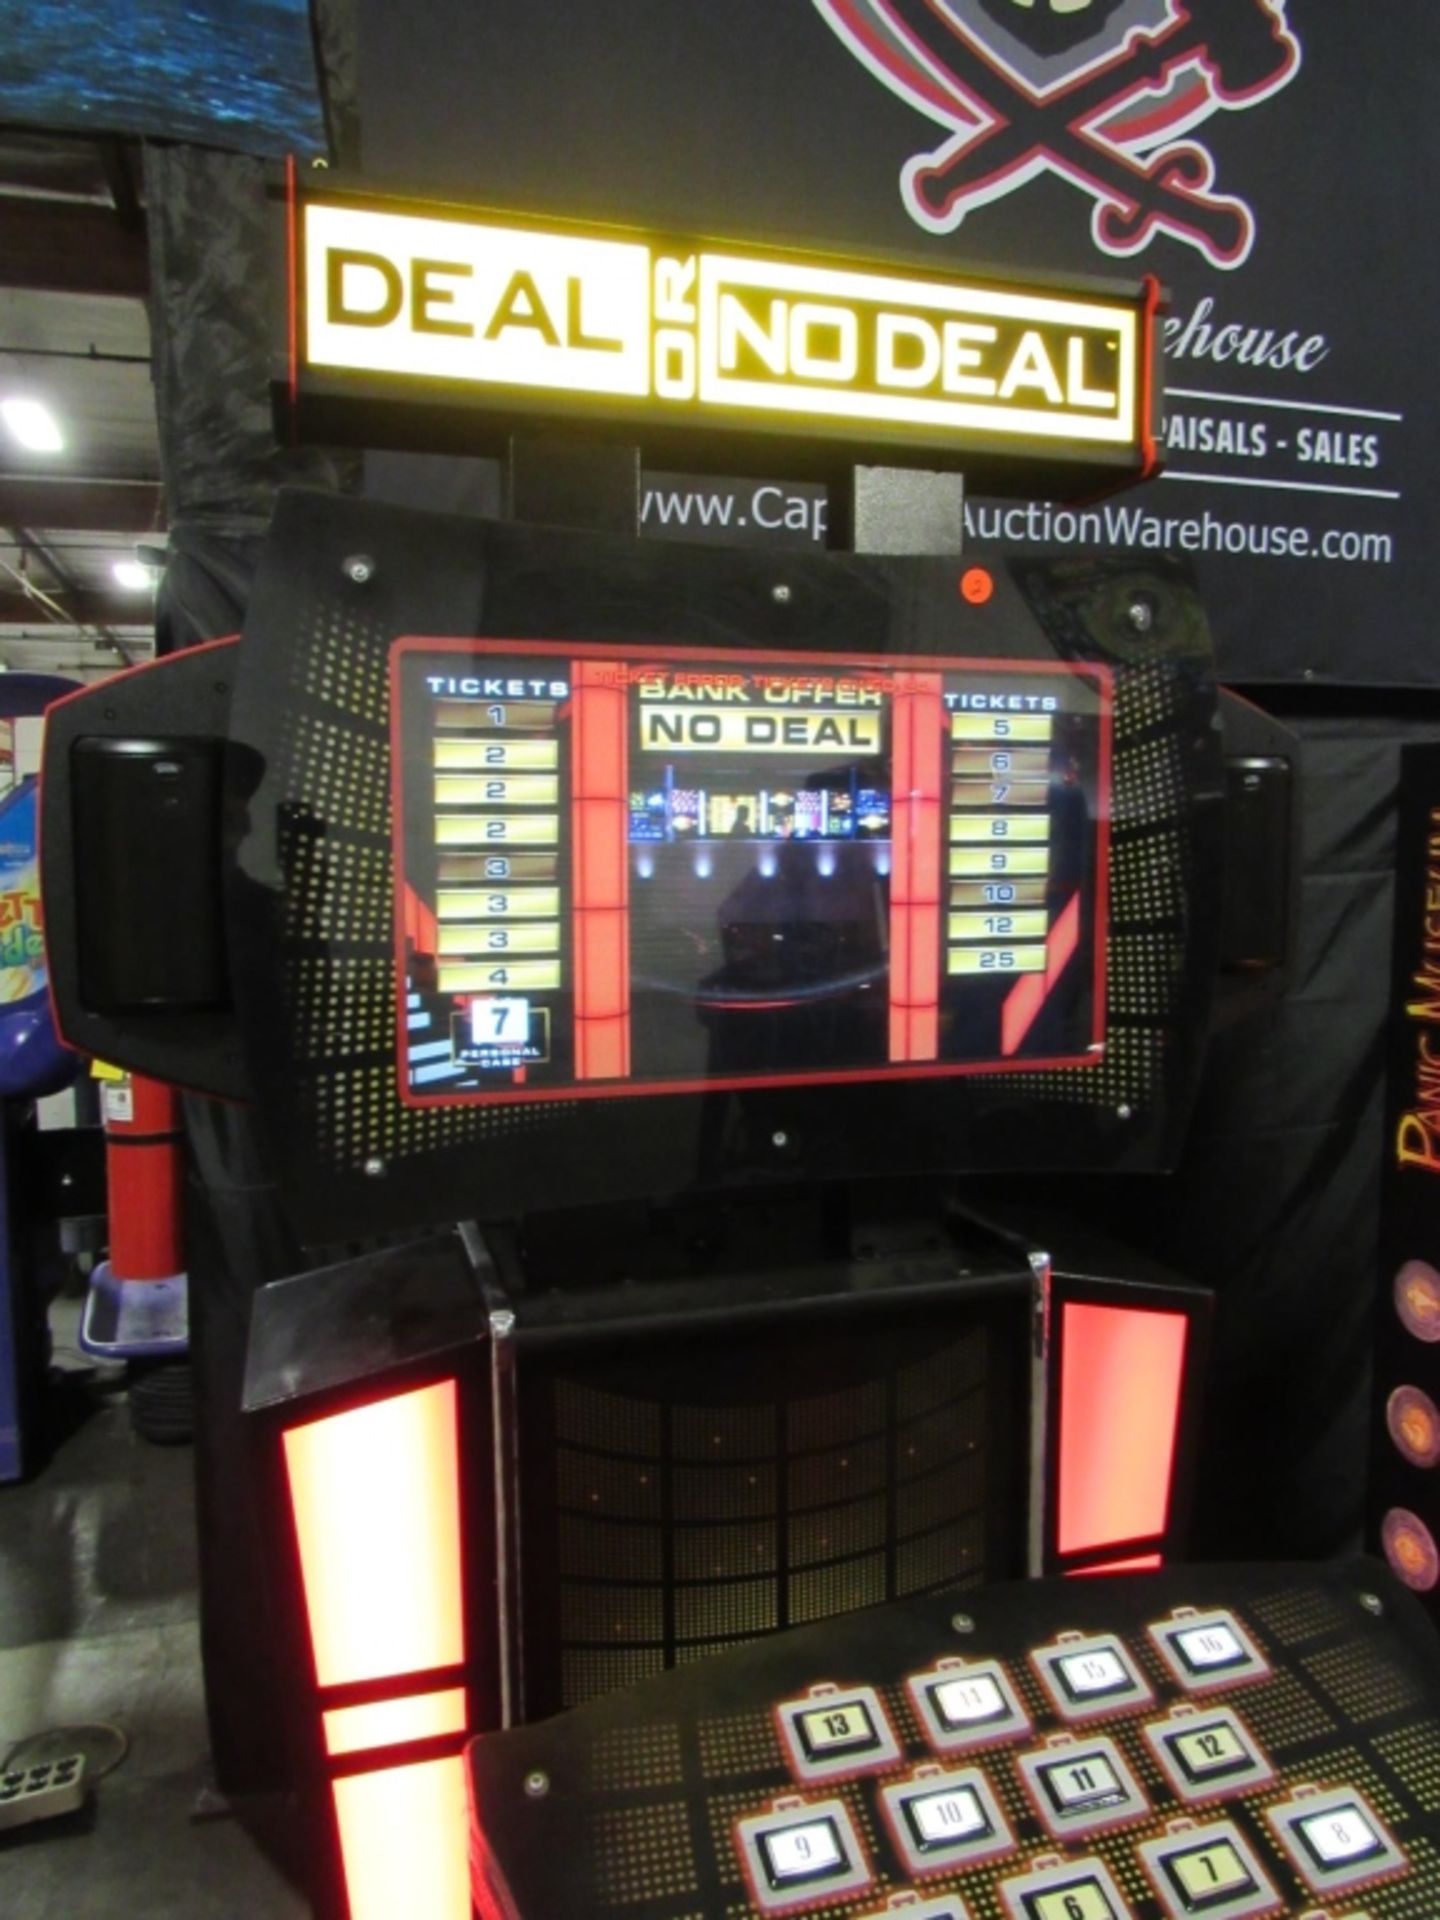 DEAL OR NO DEAL UPRIGHT REDEMPTION GAME I.C.E. - Image 3 of 5